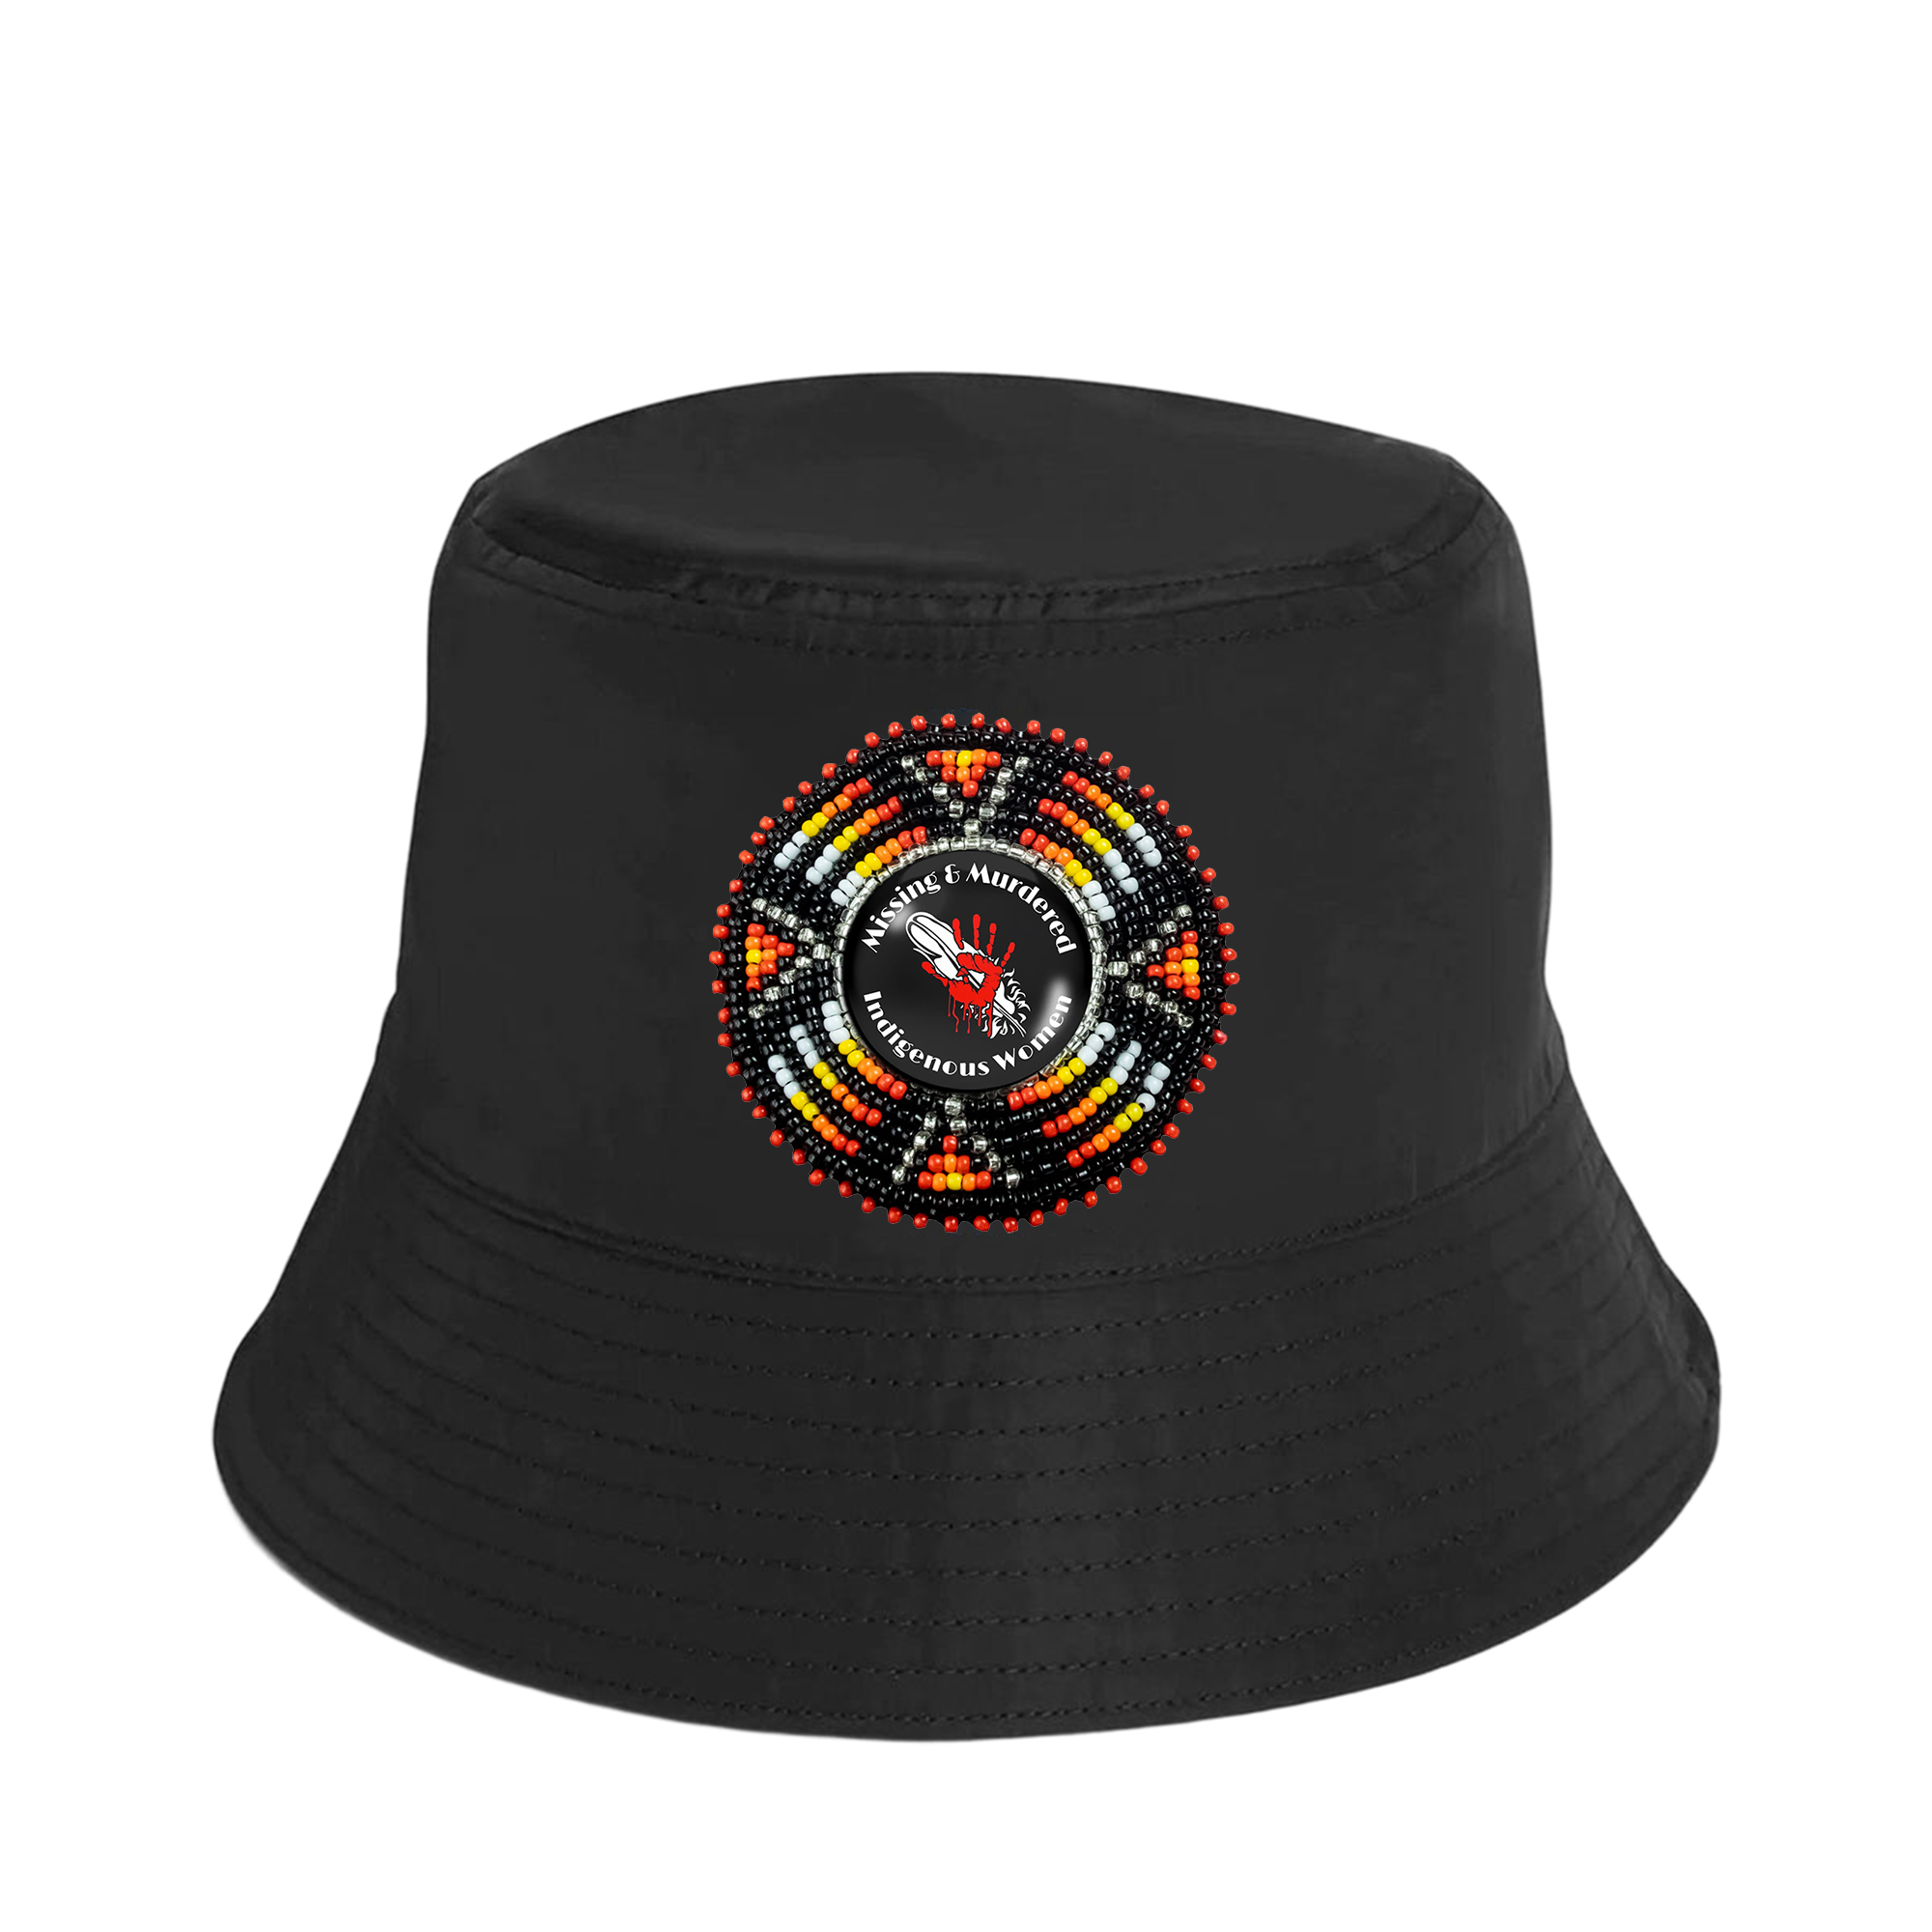 SALE 50% OFF - Missing and Murdered Women Beaded Unisex Cotton Bucket Hat with Native American